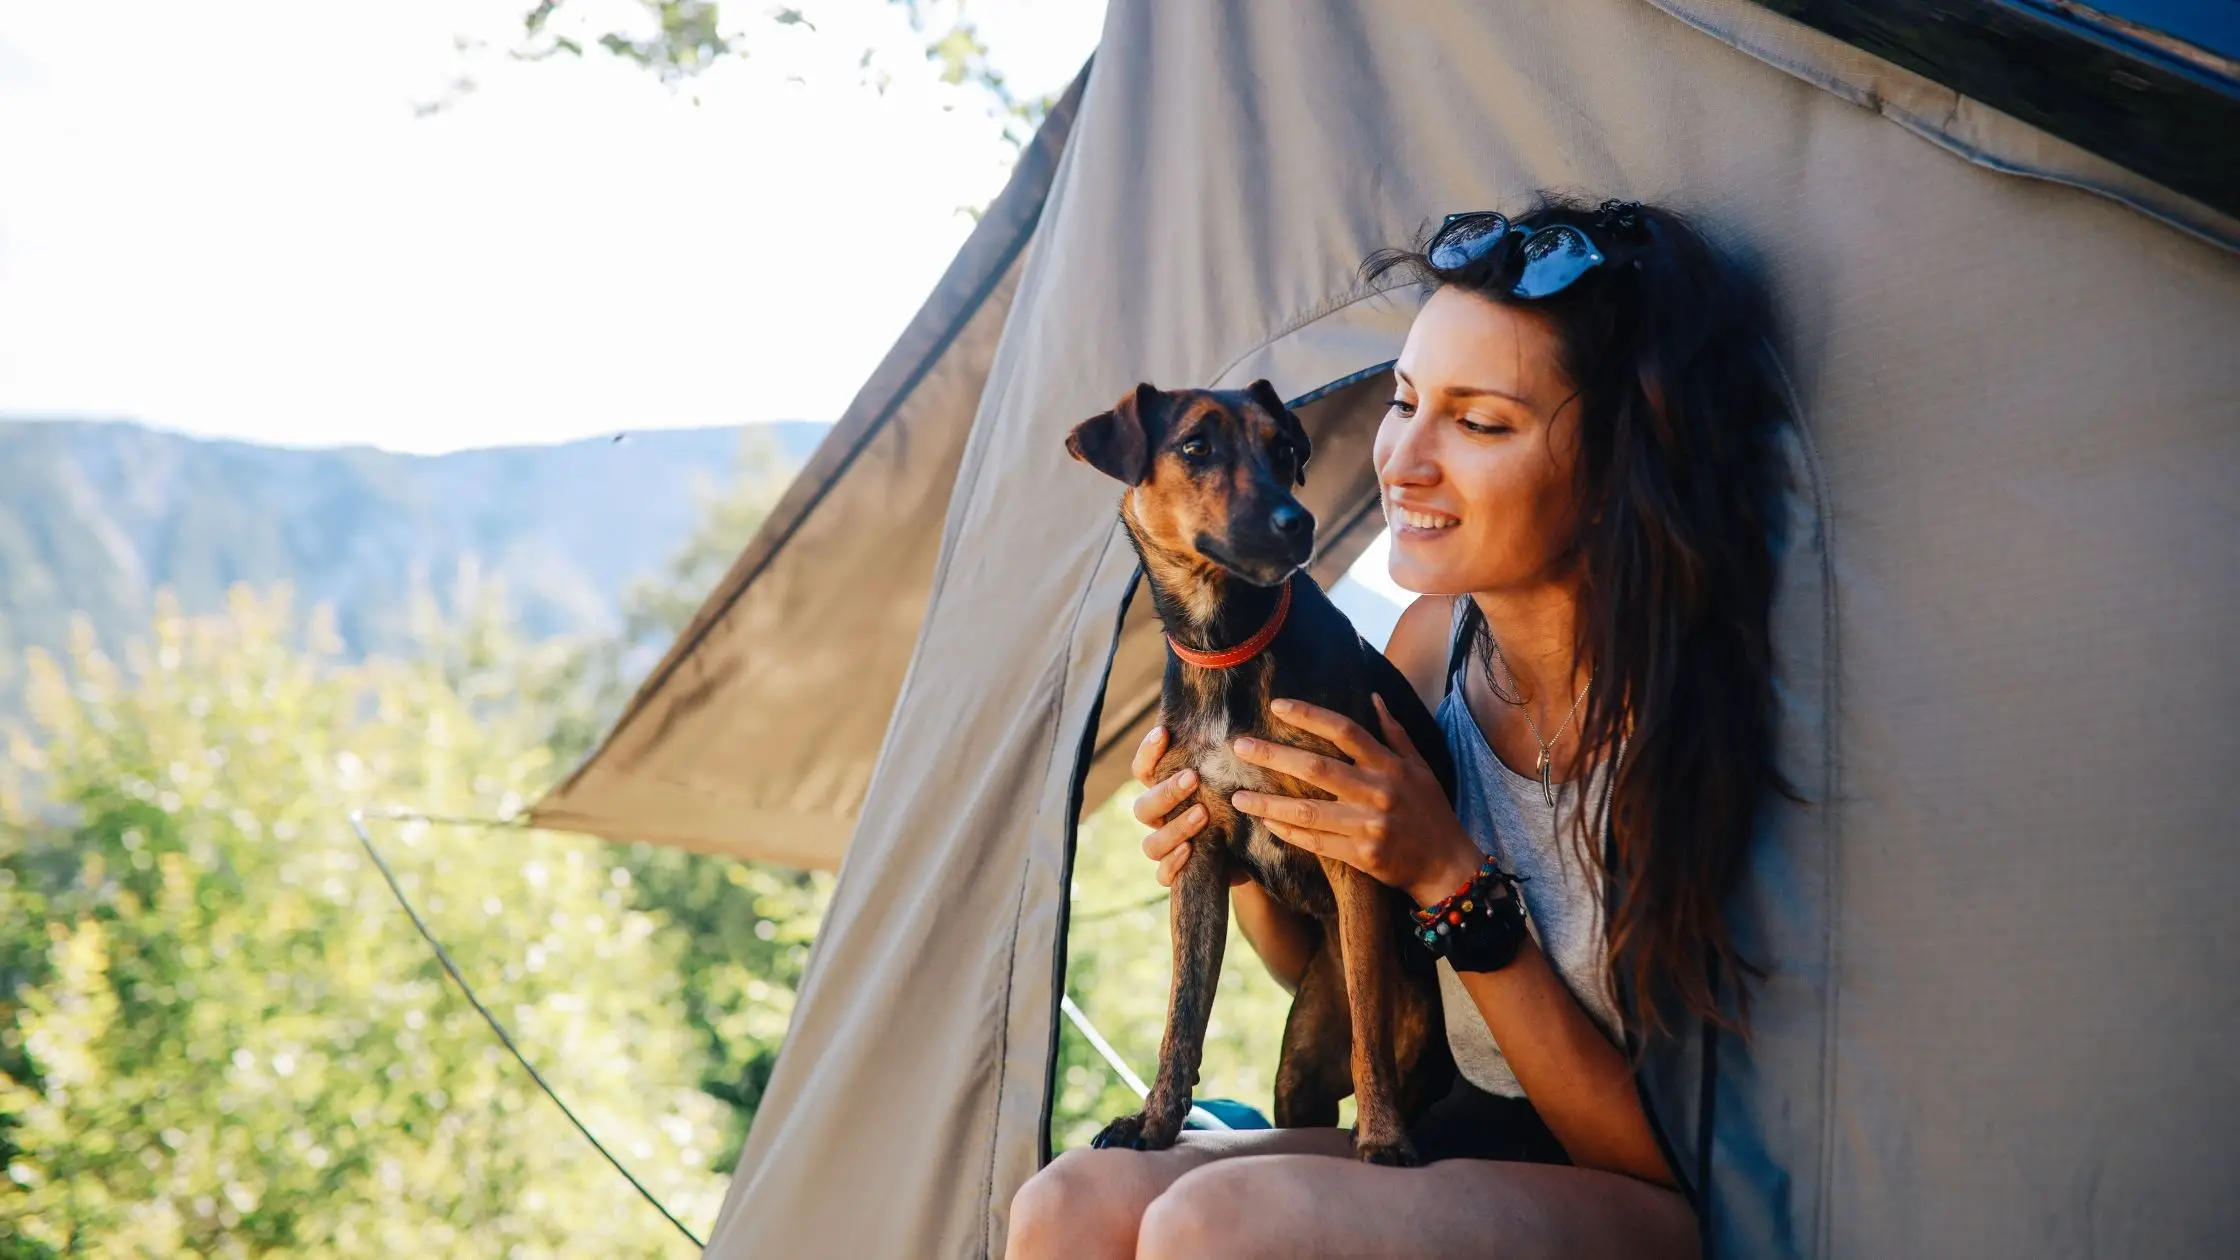 Is Camping World Pet Friendly?